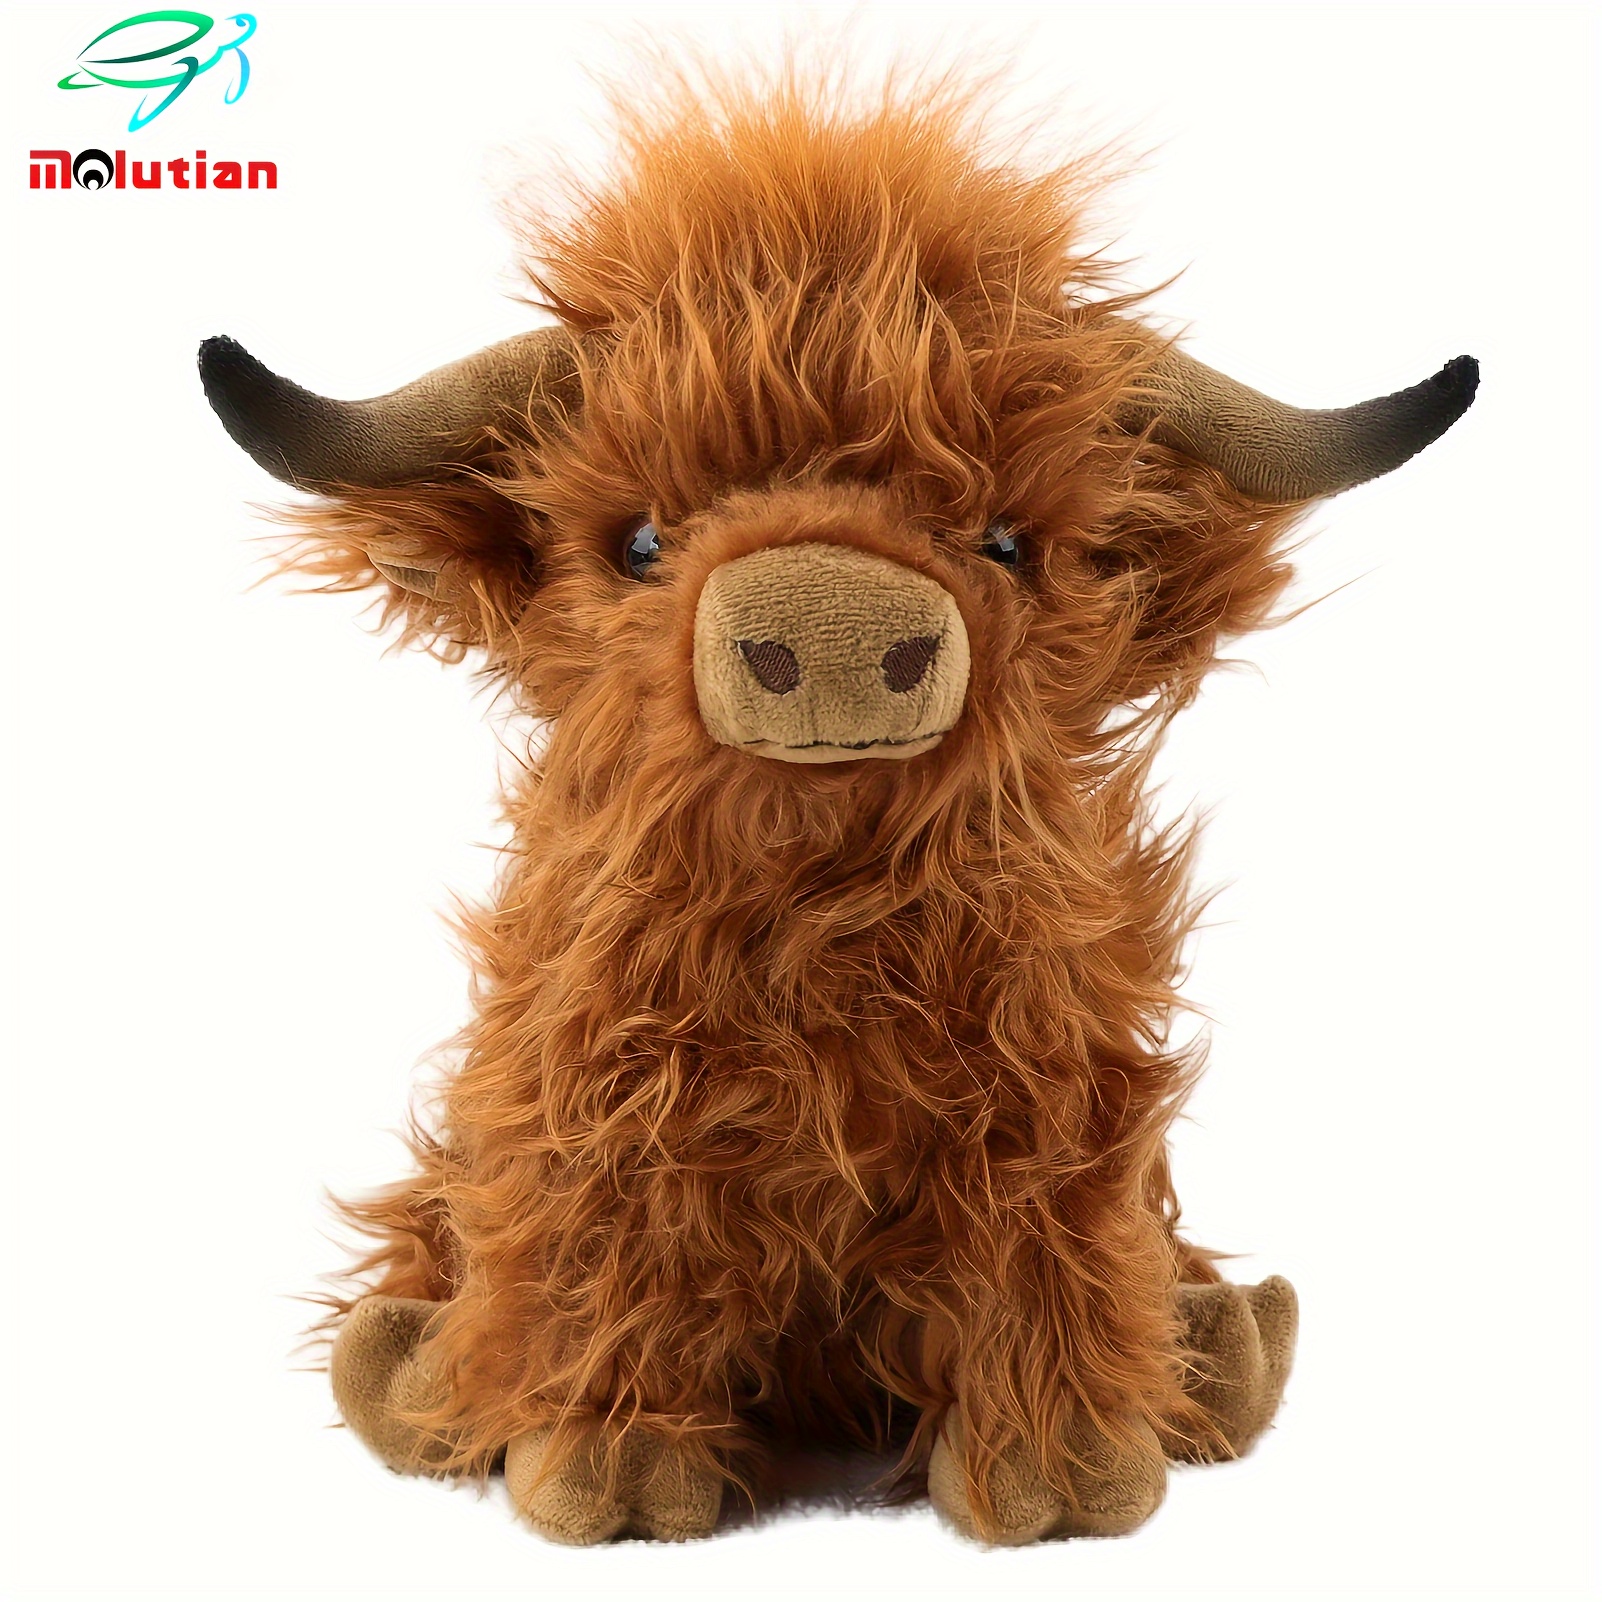 

10.63in Simulation Highland Cow Plush Toys Cow Stuffed Toy Fluffy Toy Animals Decoration Toy Comfortable Plush Figure Toy Easter Gift Valentine's Day, All Fool's Day, Mother's Day Eid Mubarak